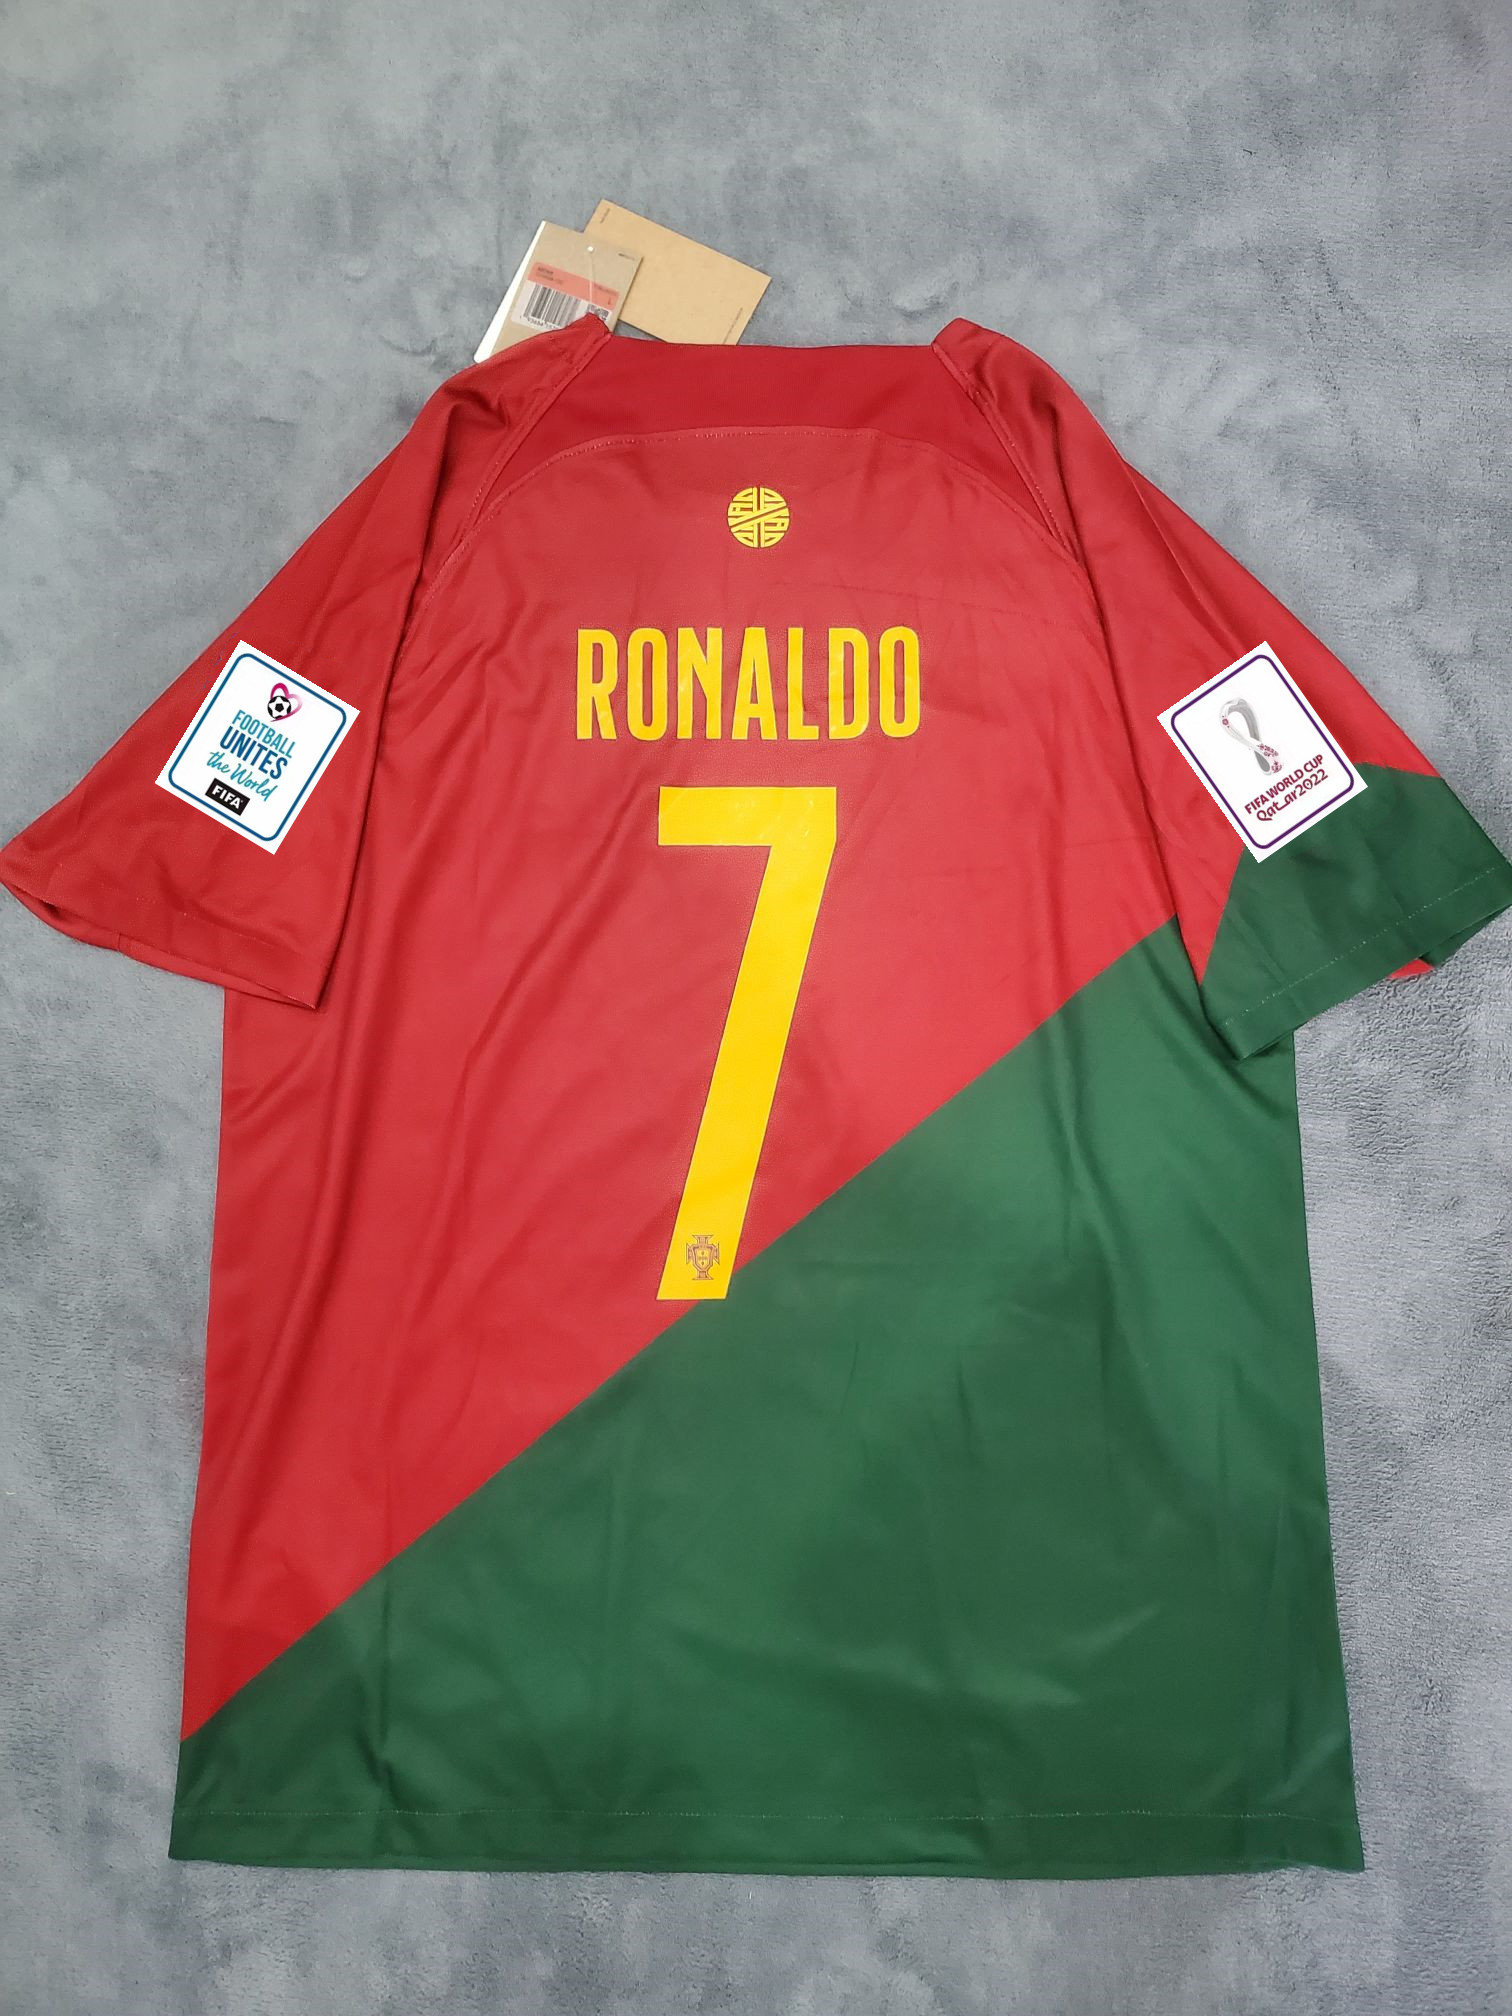  Ronaldo #7 Portugal Home Soccer Jersey 2022/23 (Large)  Red/Green : Sports & Outdoors